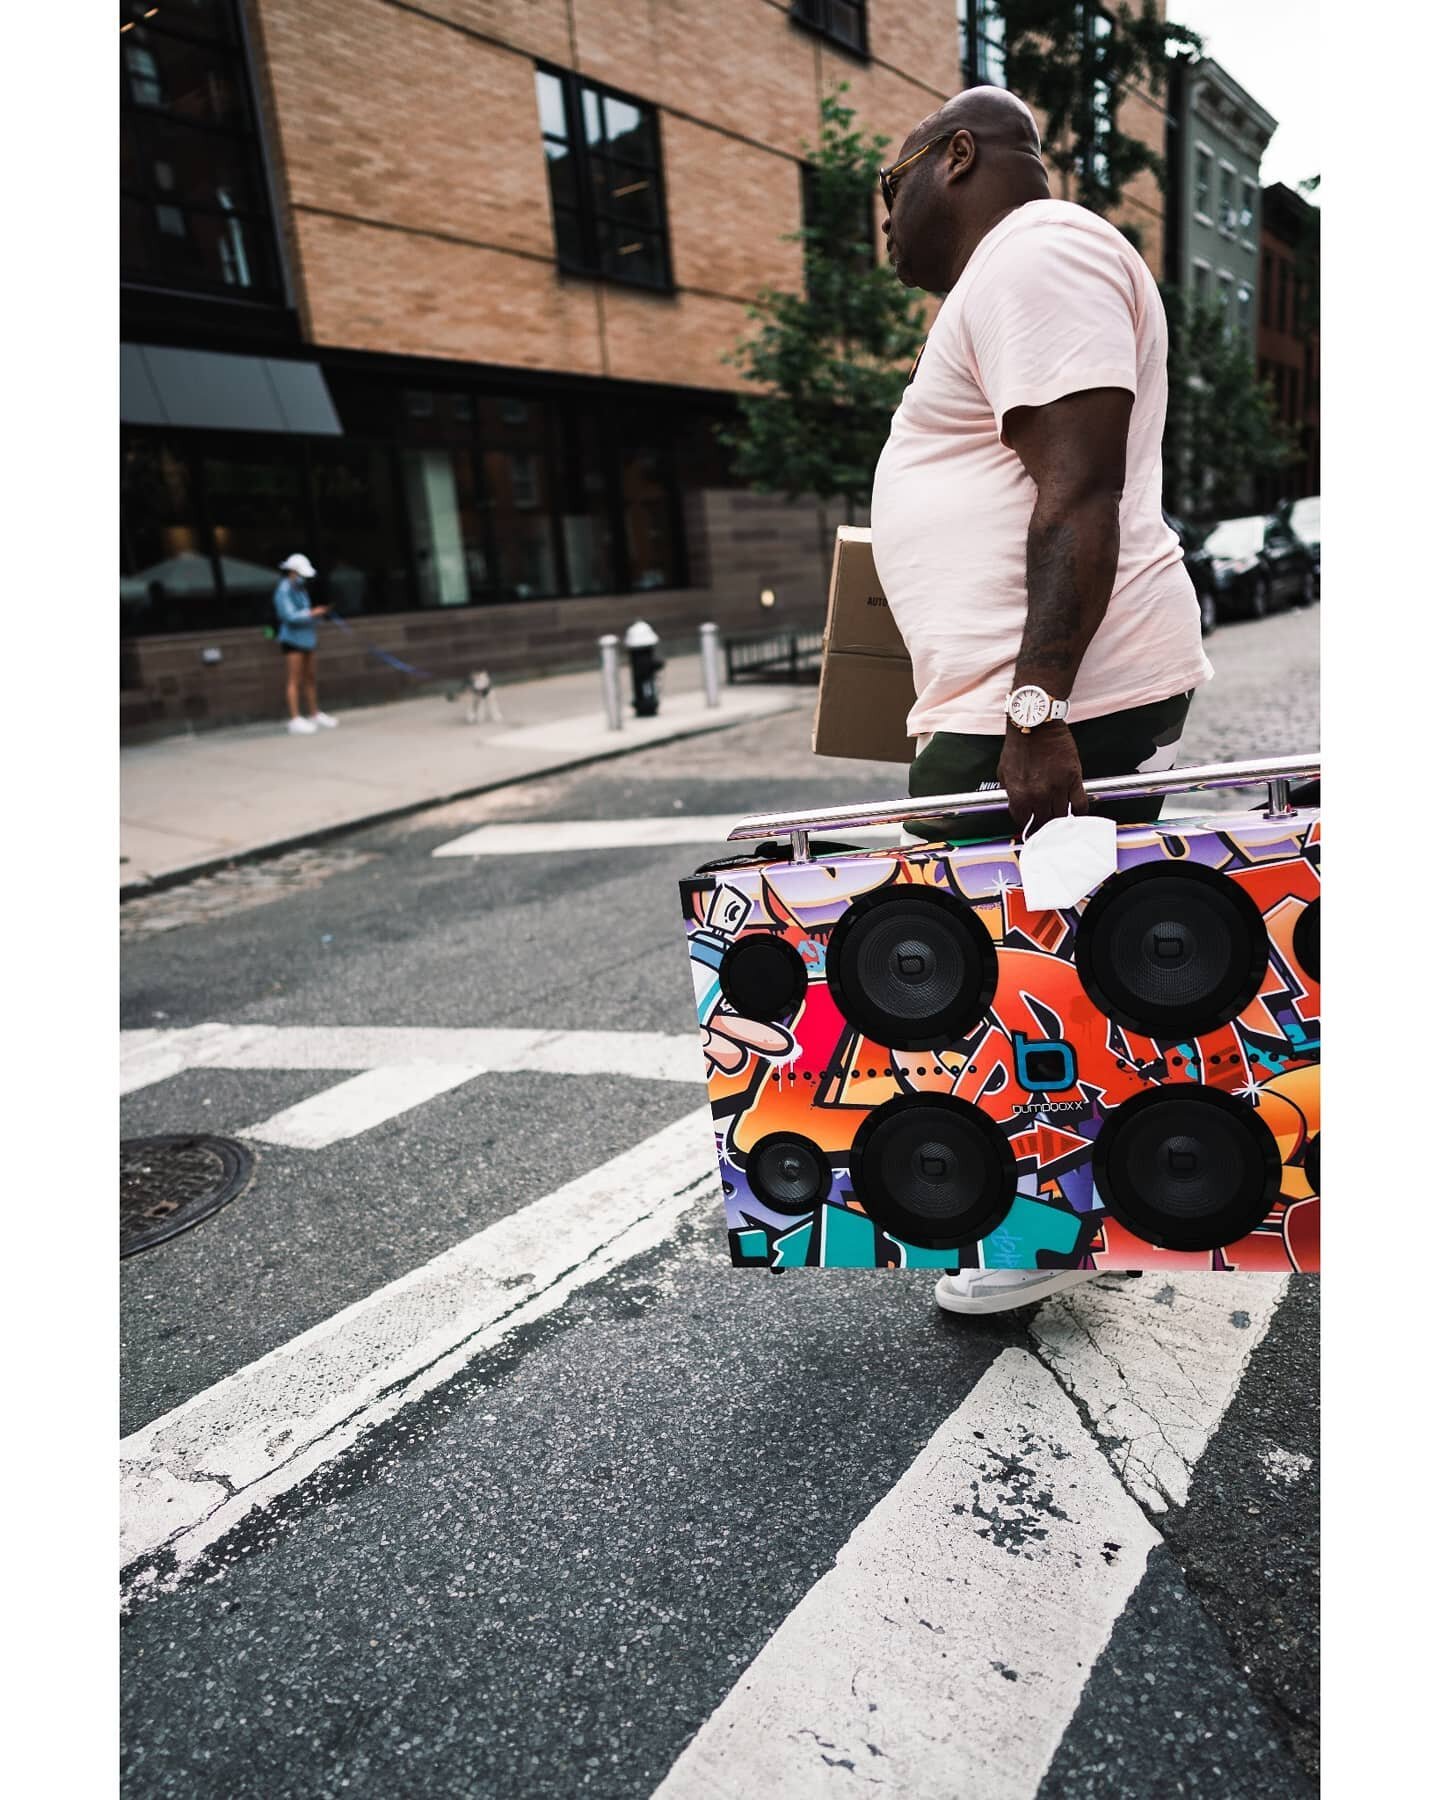 A boombox can change the world

.
.
.
.

#nycstreet #nycstreetphotography #streetphotography #streetshot #ig_street #zonestreet #streetphoto_color #capturestreets #streetsgrammer #streets_storytelling #peopleofnewyork #street_photography #thestreetph